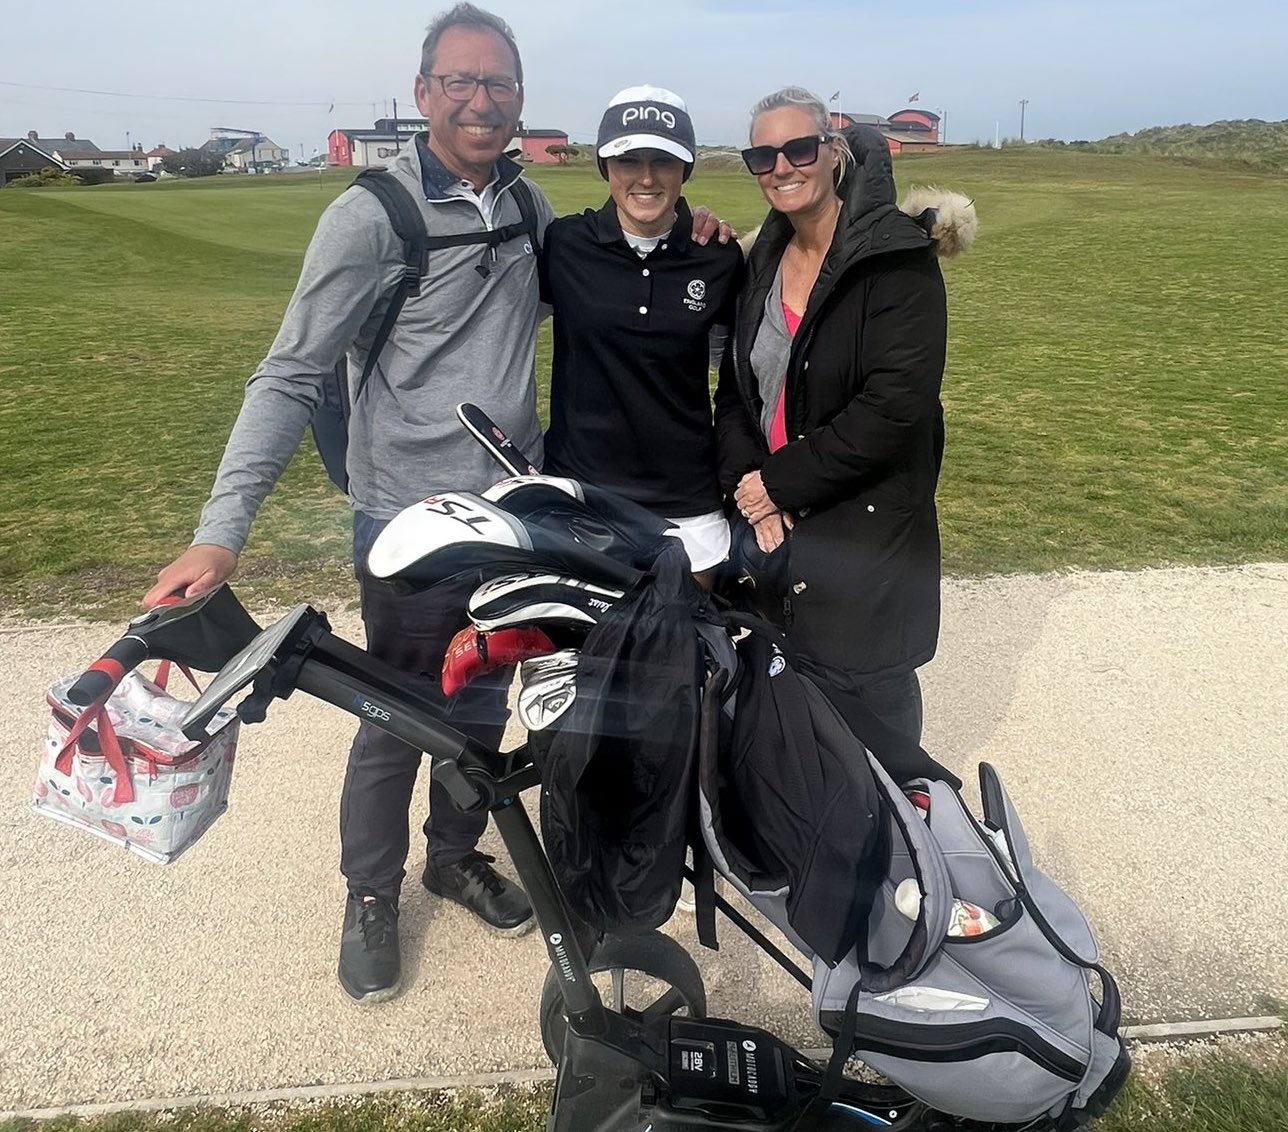 Chloe Tarbard with parents Dean and Nathalie